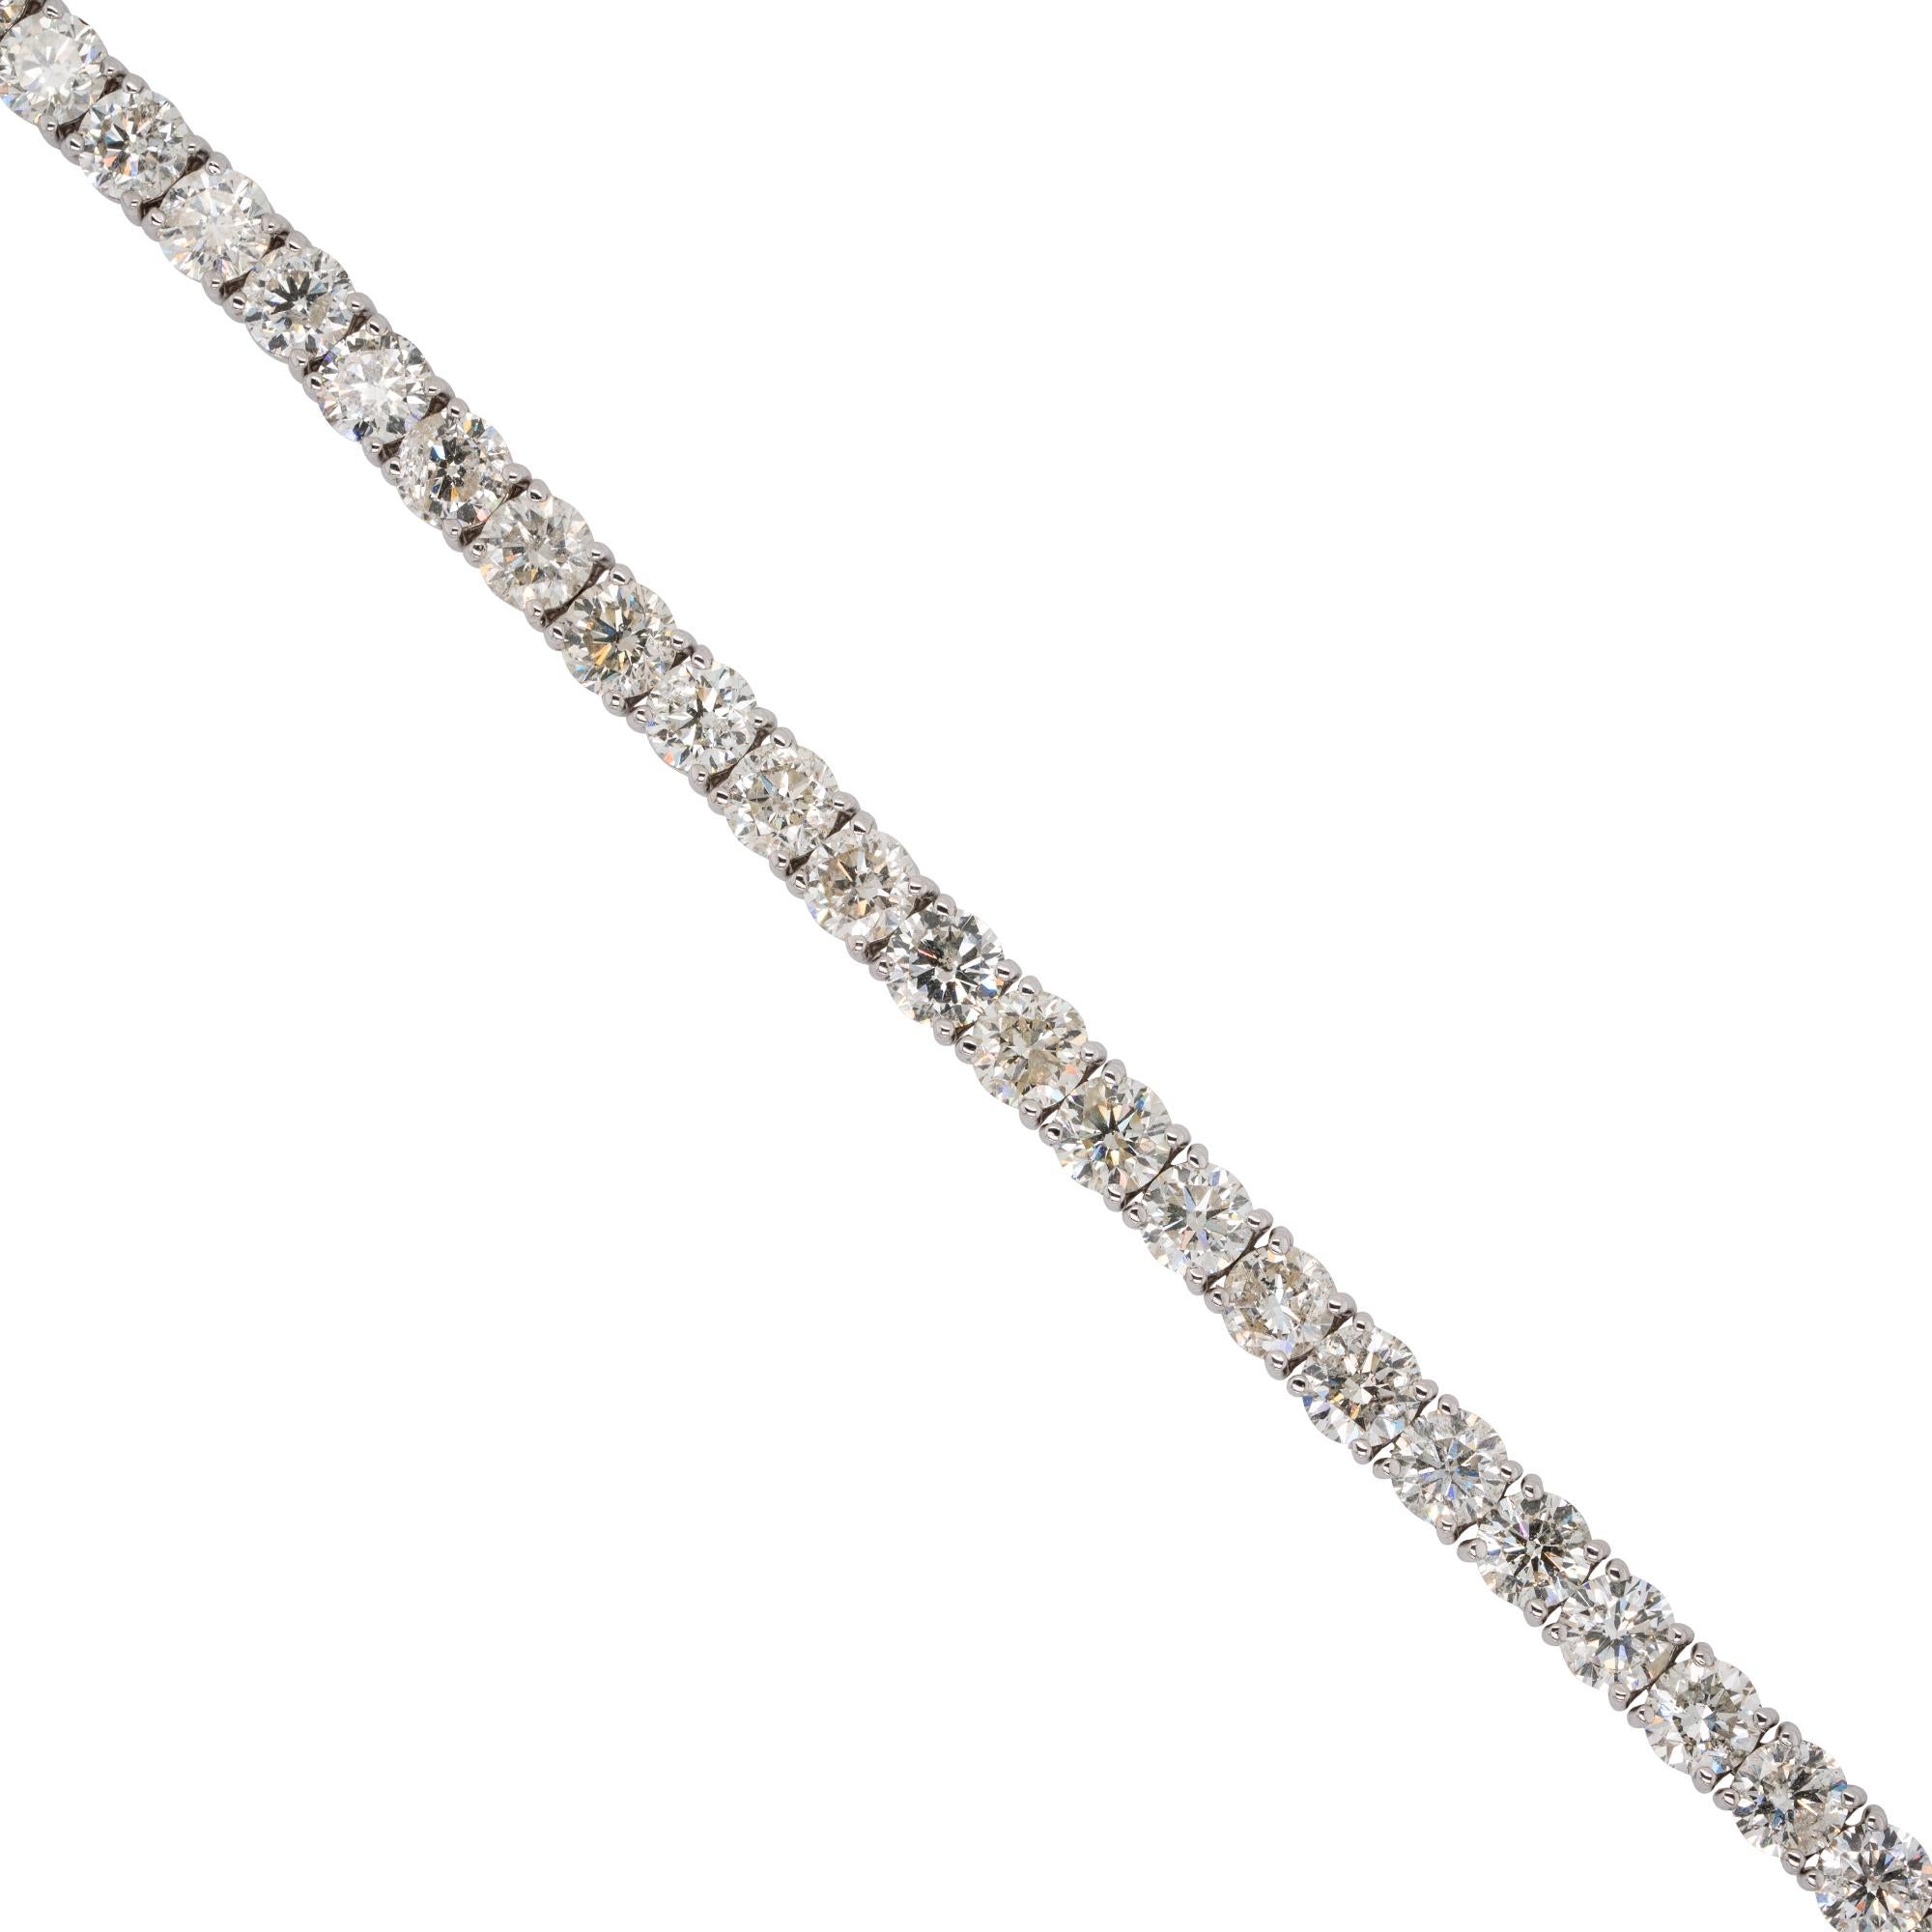 Material: 14k white gold
Diamond Details: Approx. 15.5ctw of round cut Diamonds. Diamonds are G/H in color and VS in clarity
Bracelet Measurements: 7 inches in length and 4.5mm  wide
Total Weight: 16g (10.3dwt)
Additional Details: This item comes